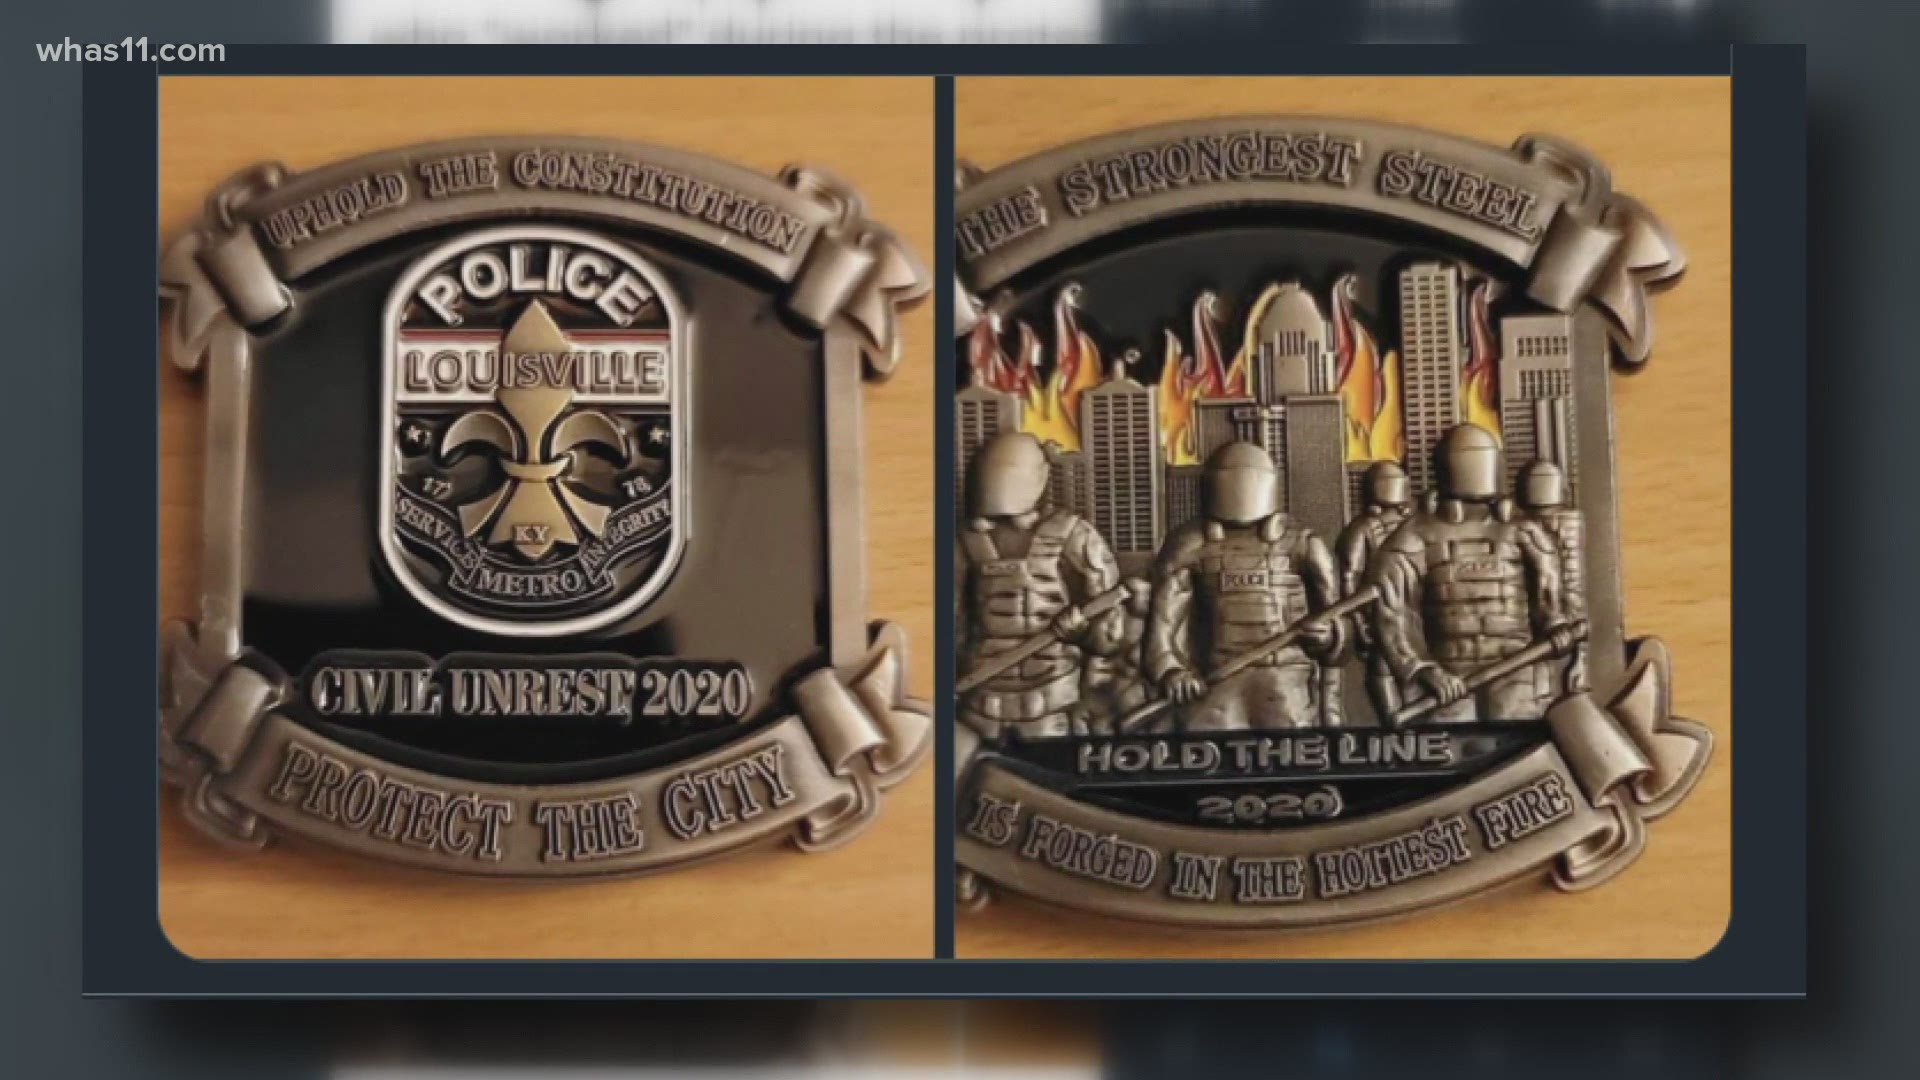 Pictures of challenge coins portraying Louisville Metro Police Officers and this summer's protests are circulating the internet and it's sparking backlash.